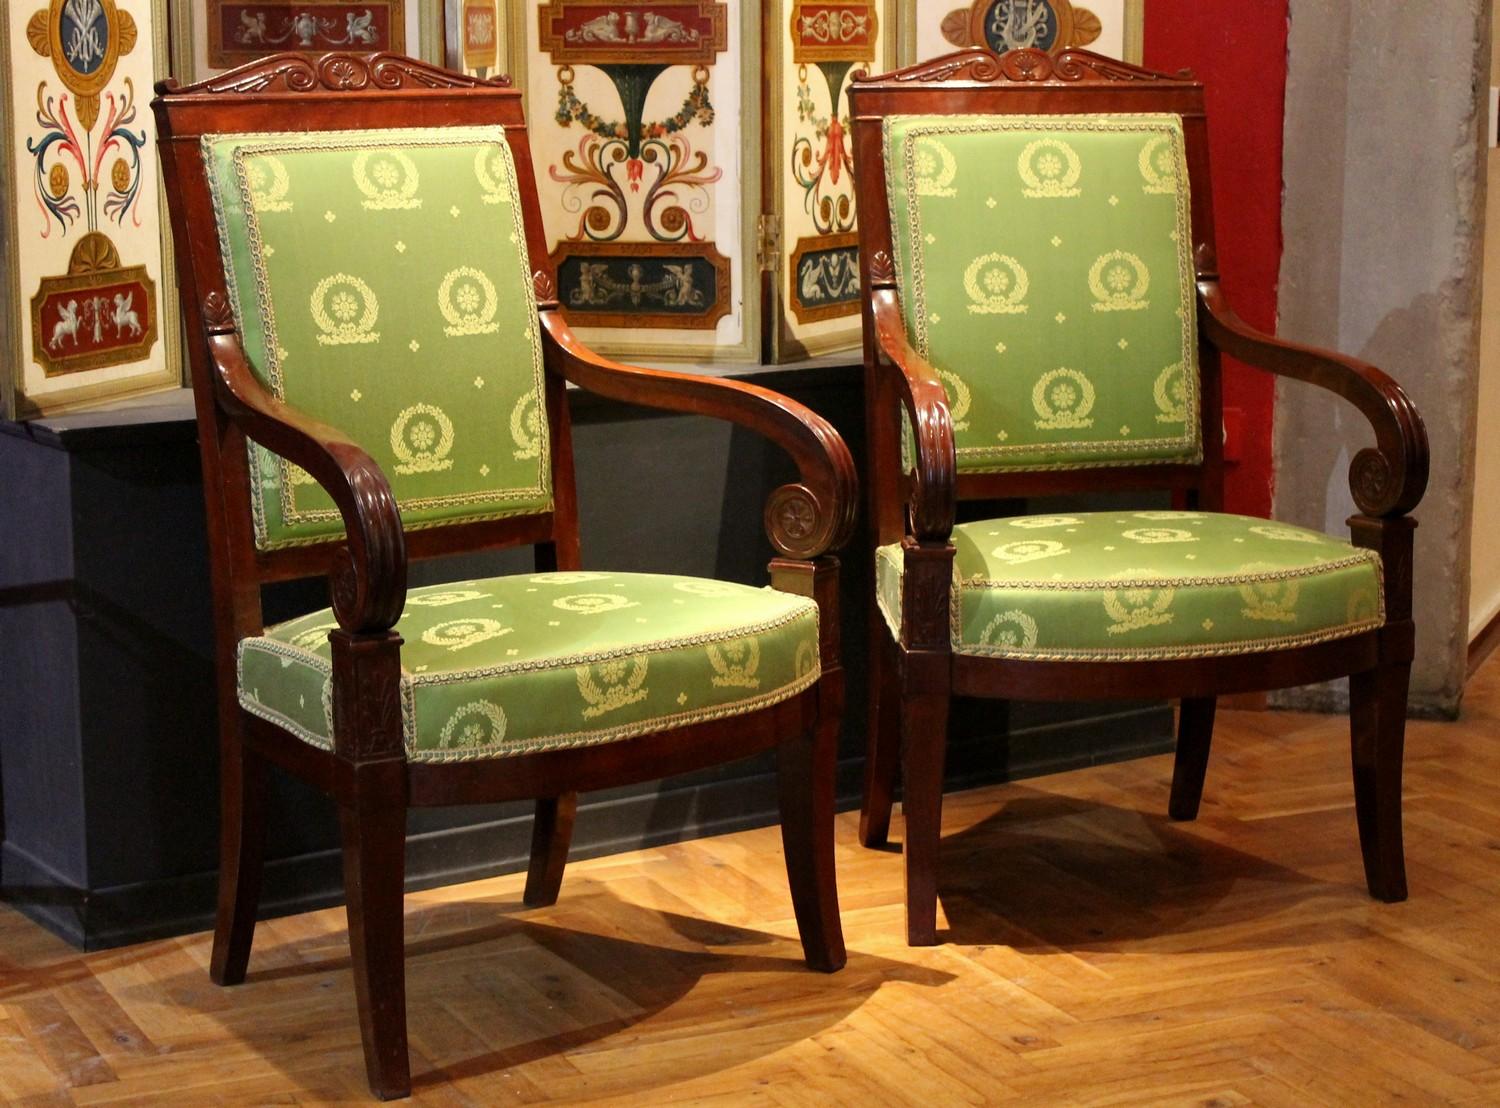 This magnificent pair of French late 18th Century- early 19th Century armchairs could be attributable to Jacob-Desmalter, an outstanding chairmaker and cabinetmaker who worked in the Louis XVI style and Directoire styles of the earlier phase of